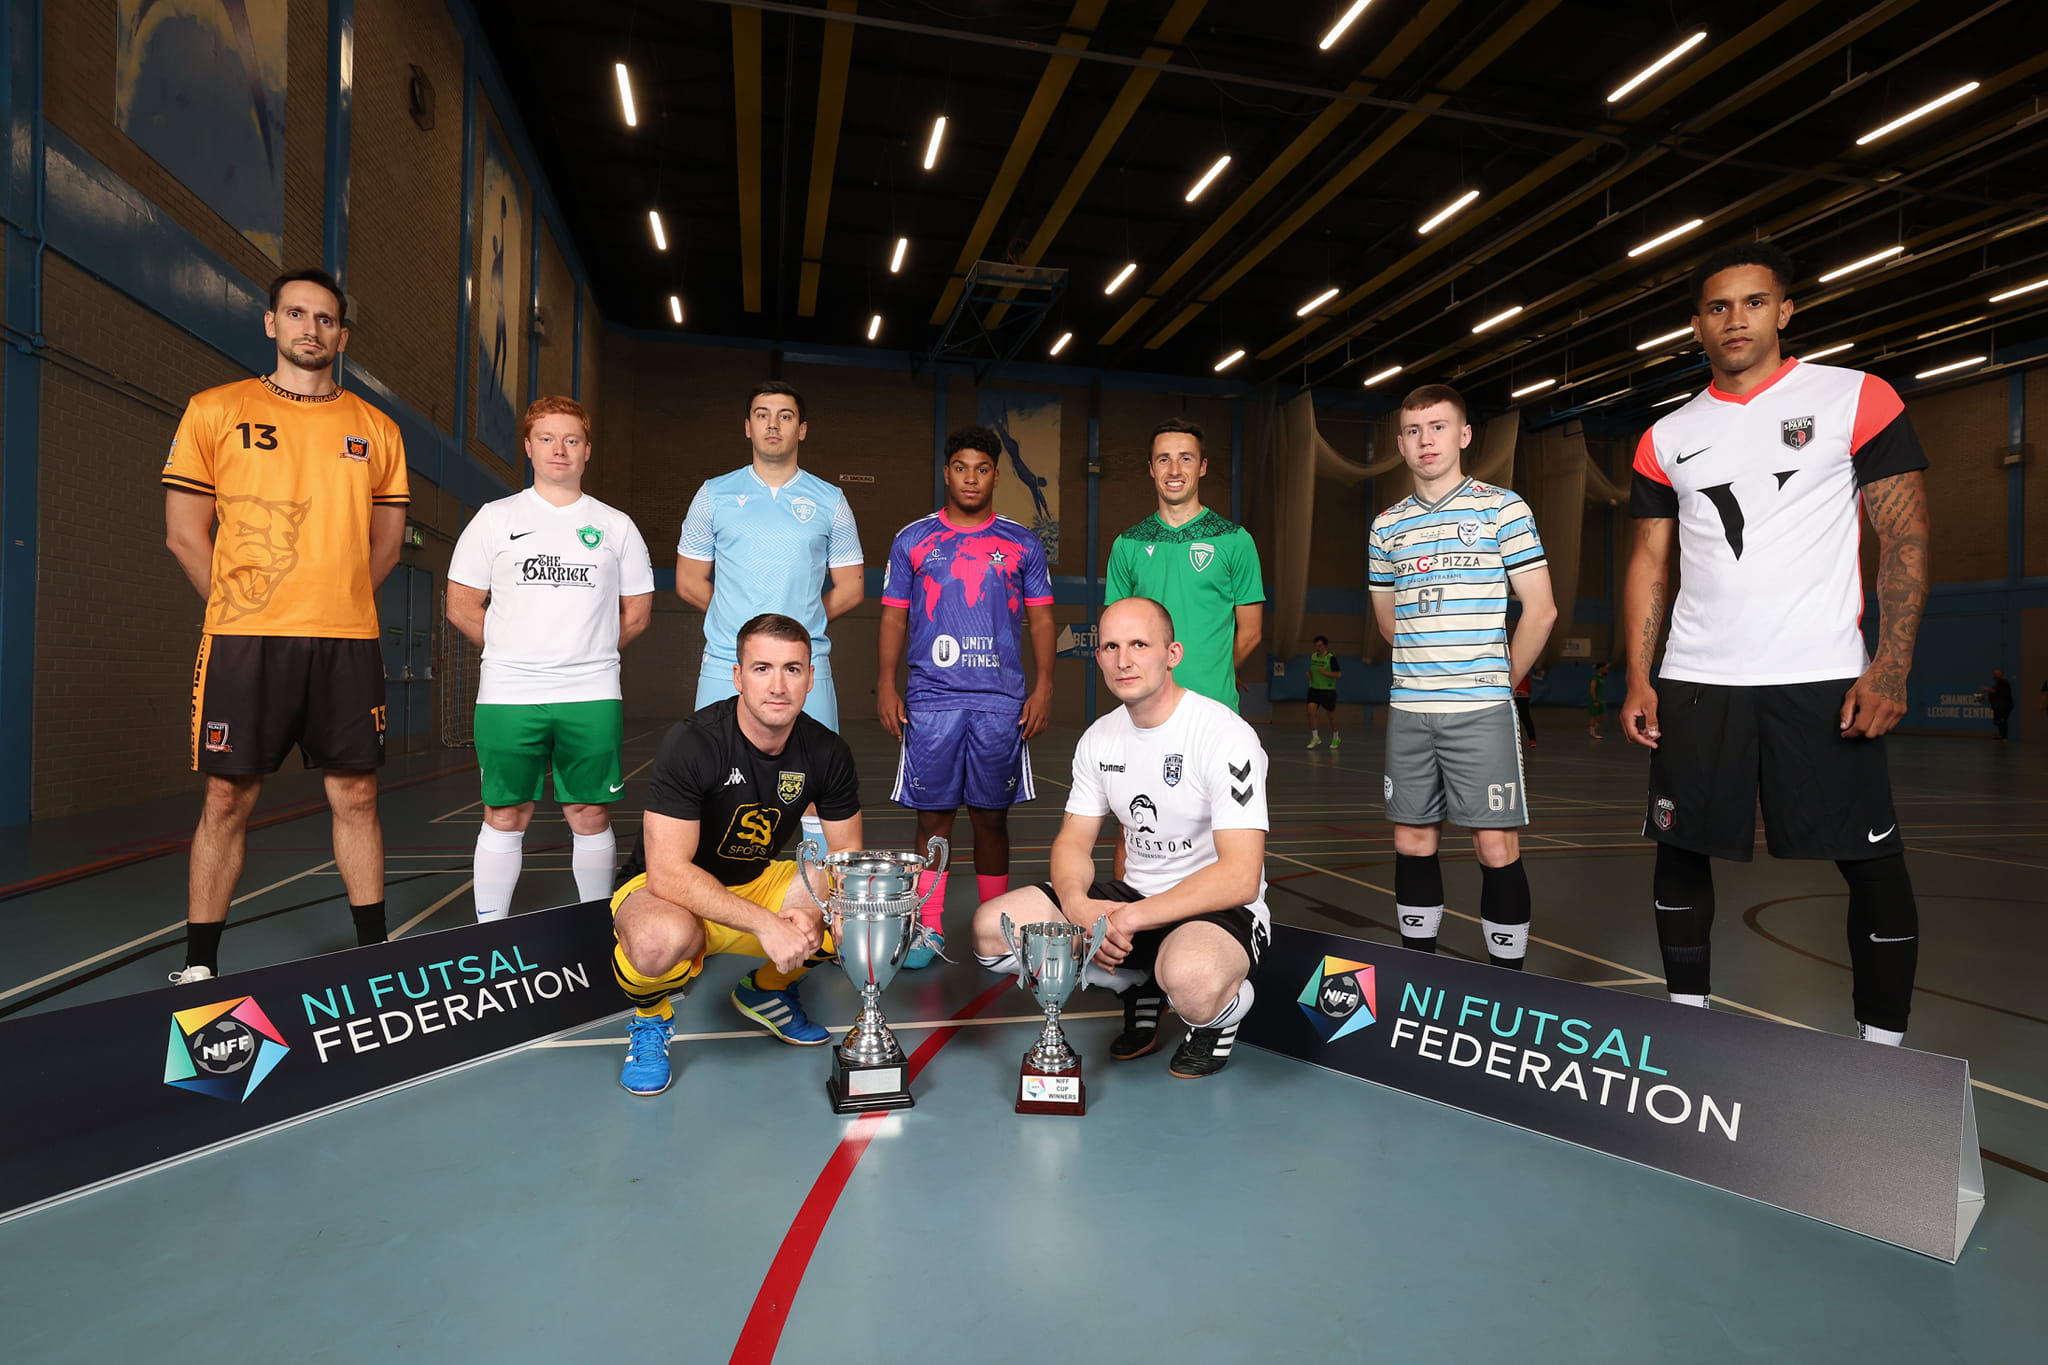 Omagh Futsal Club's Martin Cassidy and David Alonso nominated for Sport NI Awards